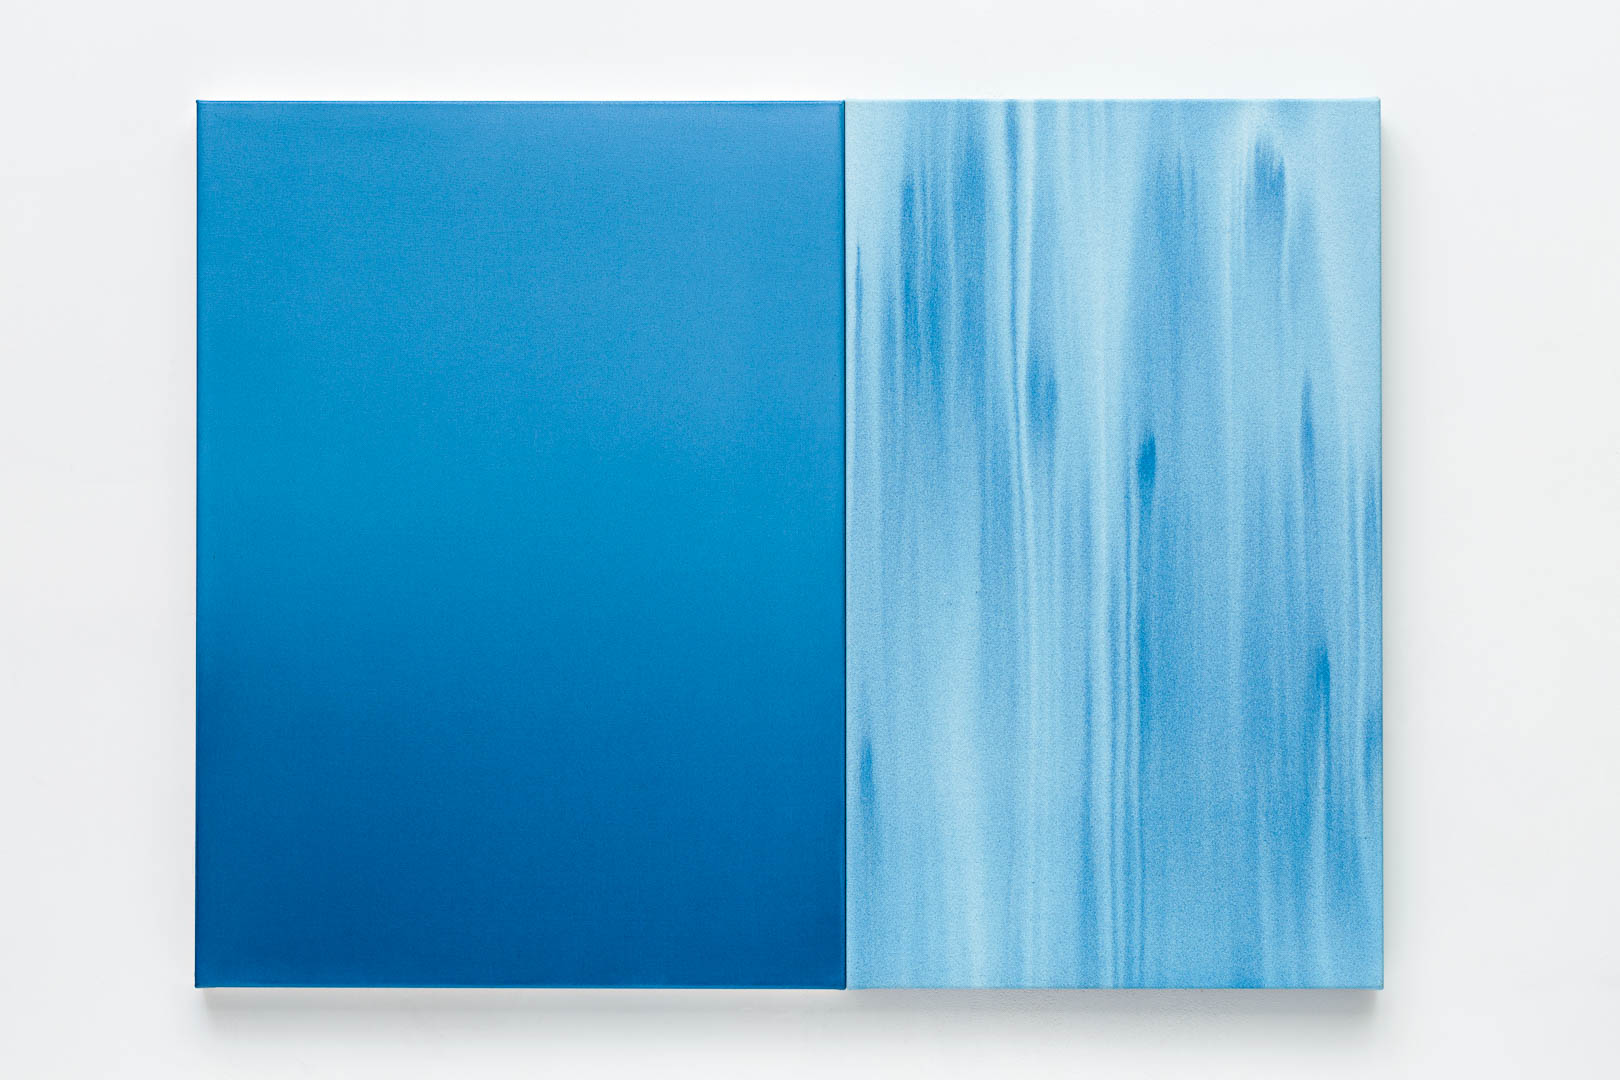   Stasis  Diptych 2017 102cm x 77cm acrylic on primed polyester. Photography by  Document Photography.  